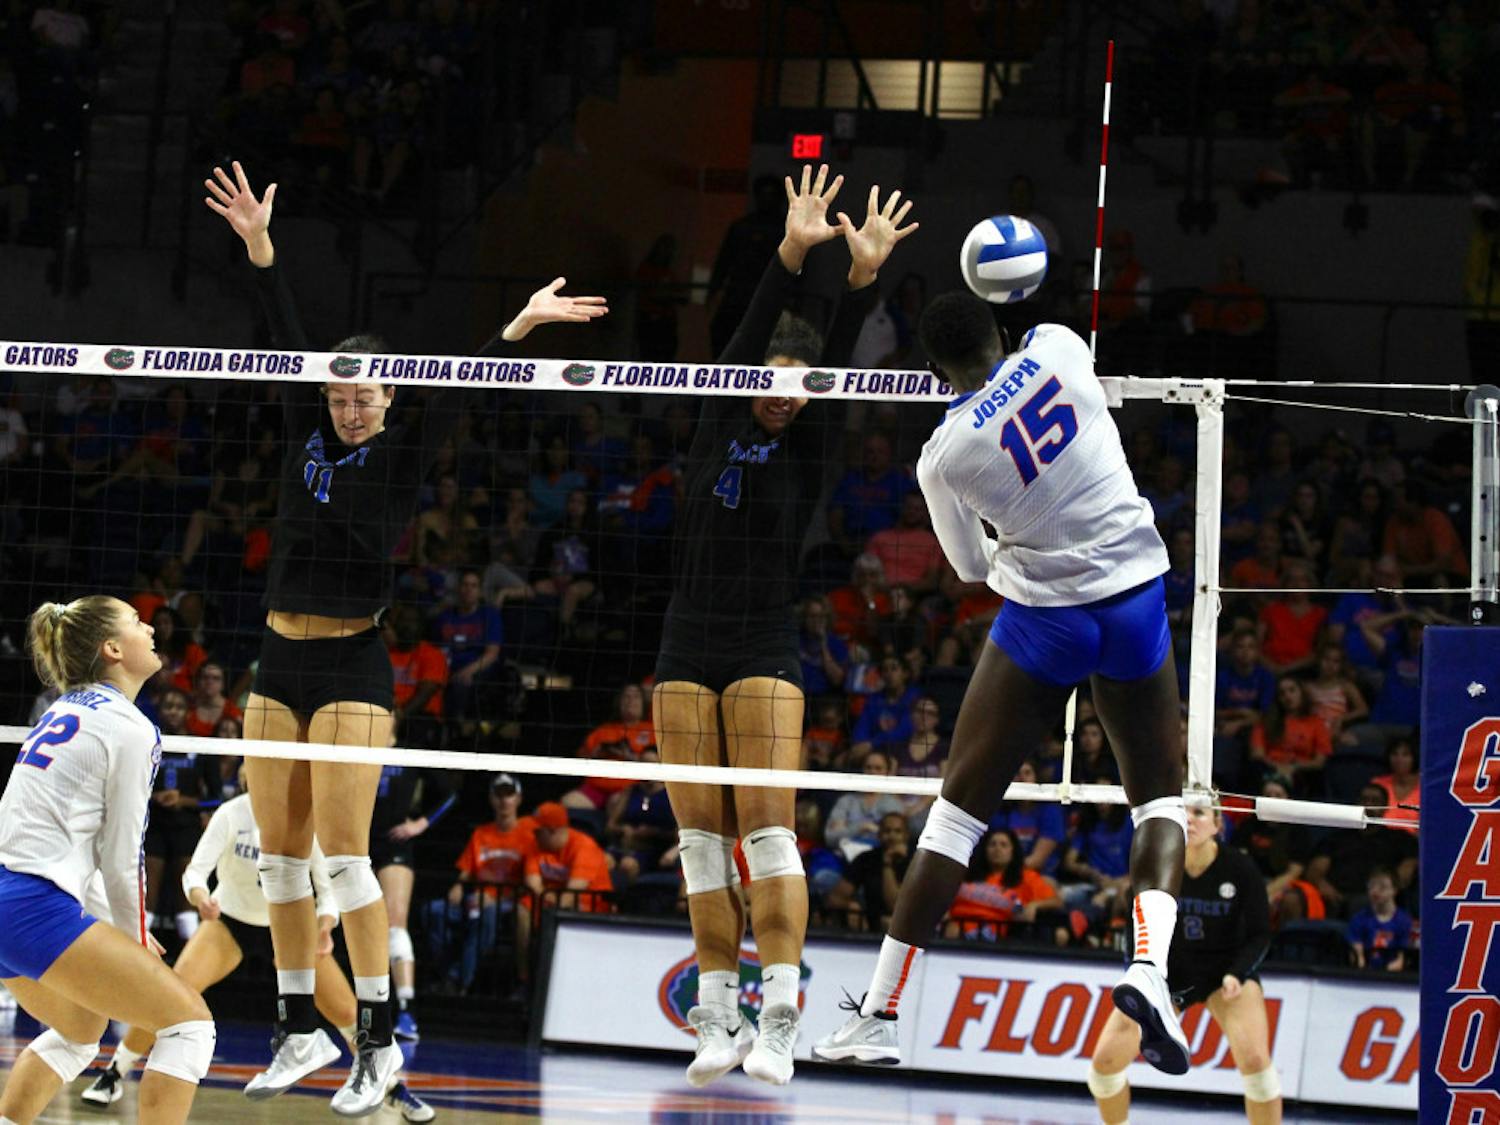 UF's Shainah Joseph recorded 19 kills in Florida's 3-1 win over Miami in the second round of the NCAA Tournament on Friday at the O'Connell Center.